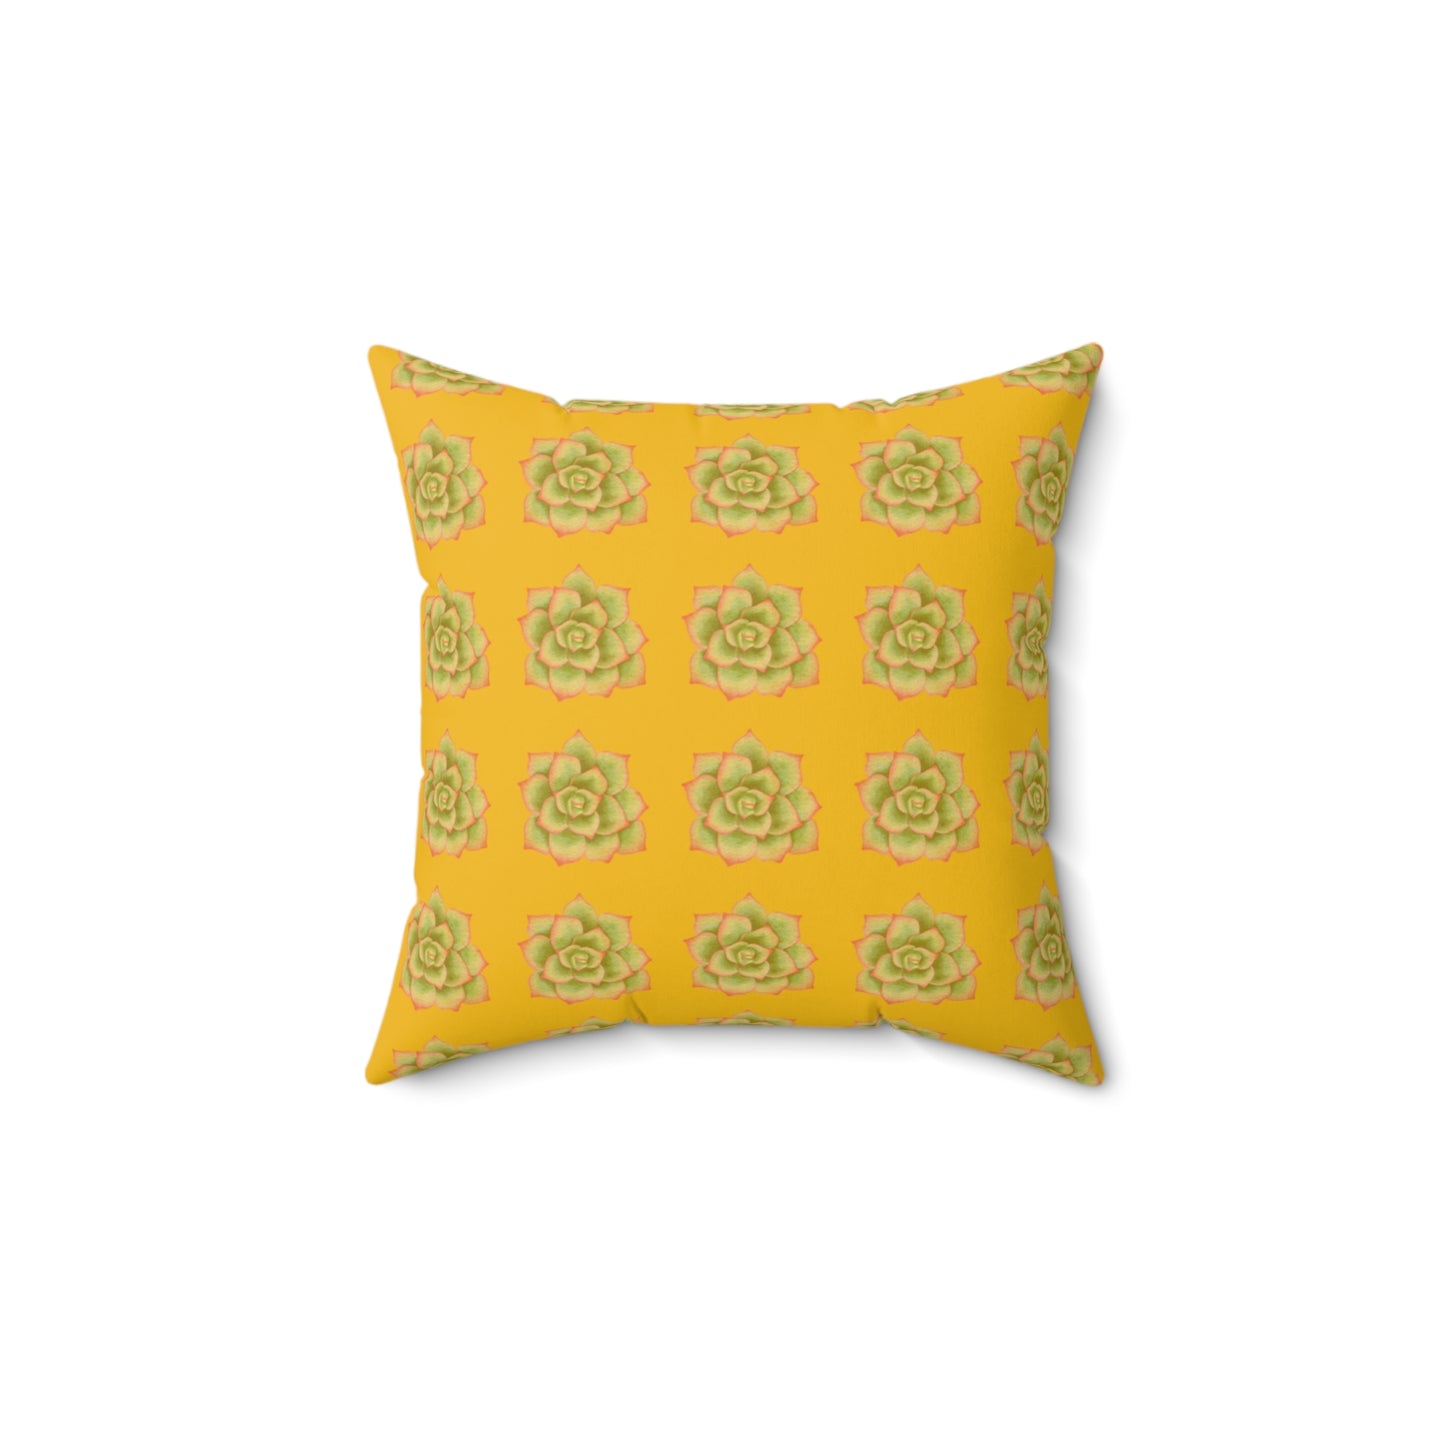 "I'm Picky" Throw Pillow